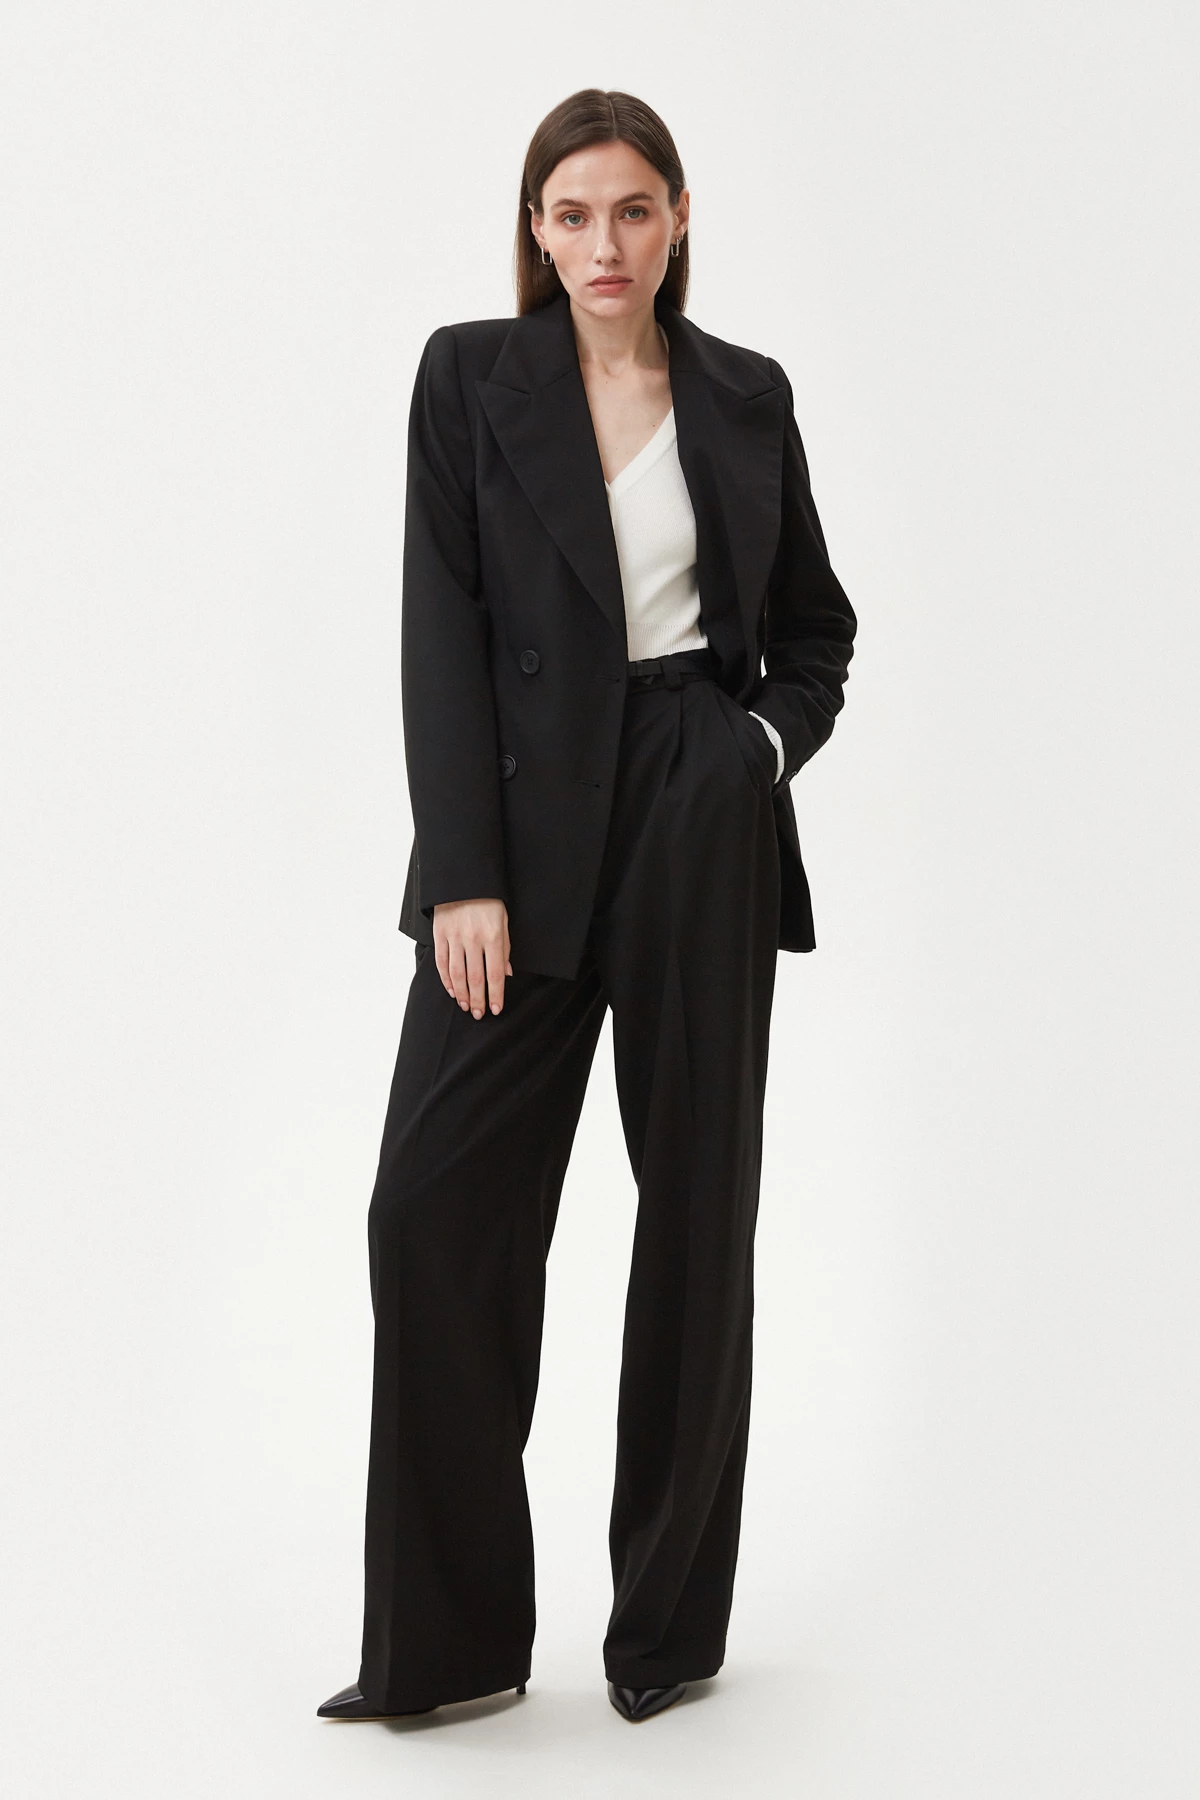 Black loose fit pants made of viscose suit fabric, photo 5